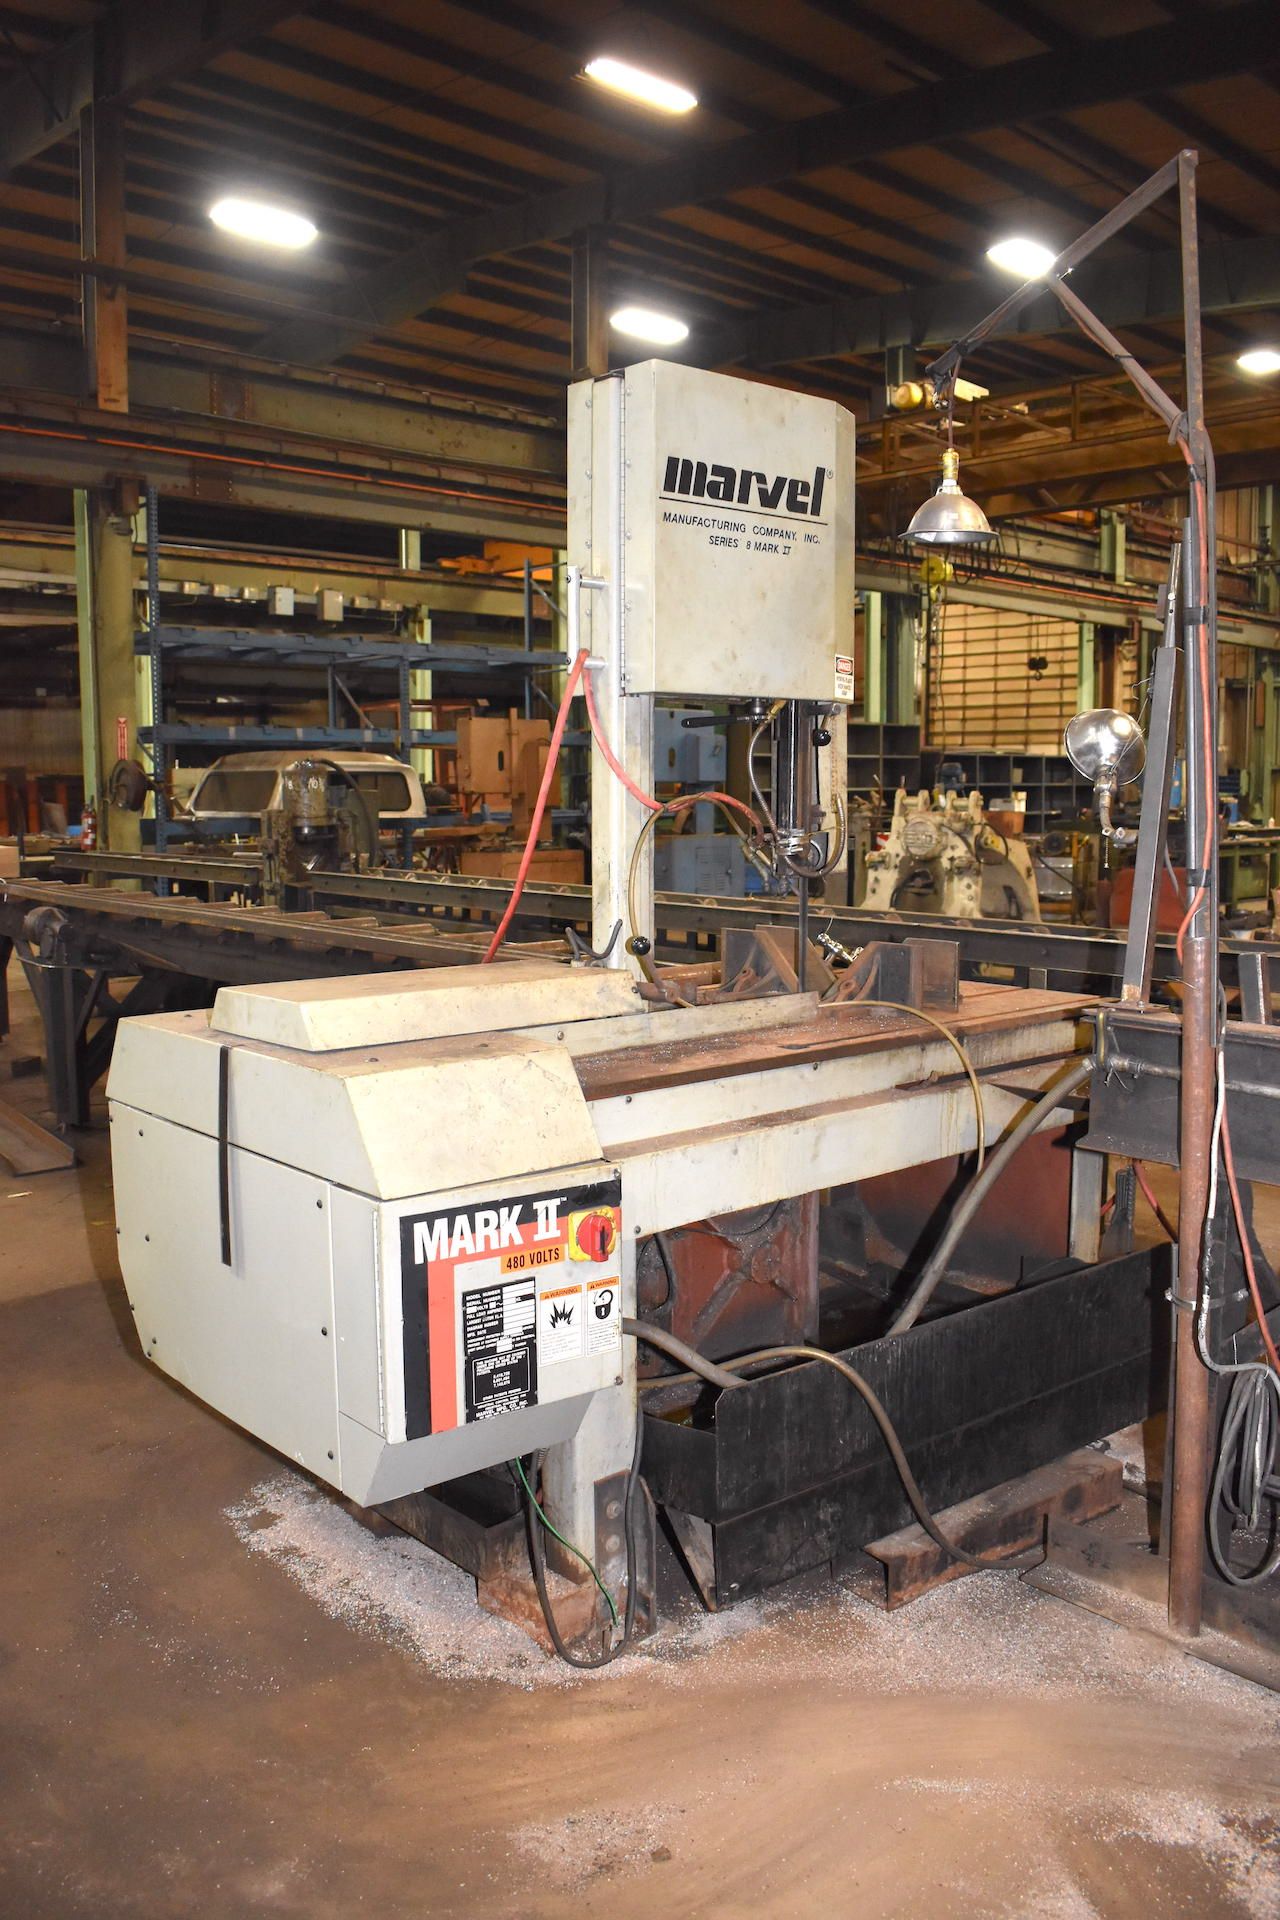 Marvel Model 8-Mark-II Vertical Band Saw, S/N 830913 (2012), with Heavy Duty Roller Infeed & Outfeed